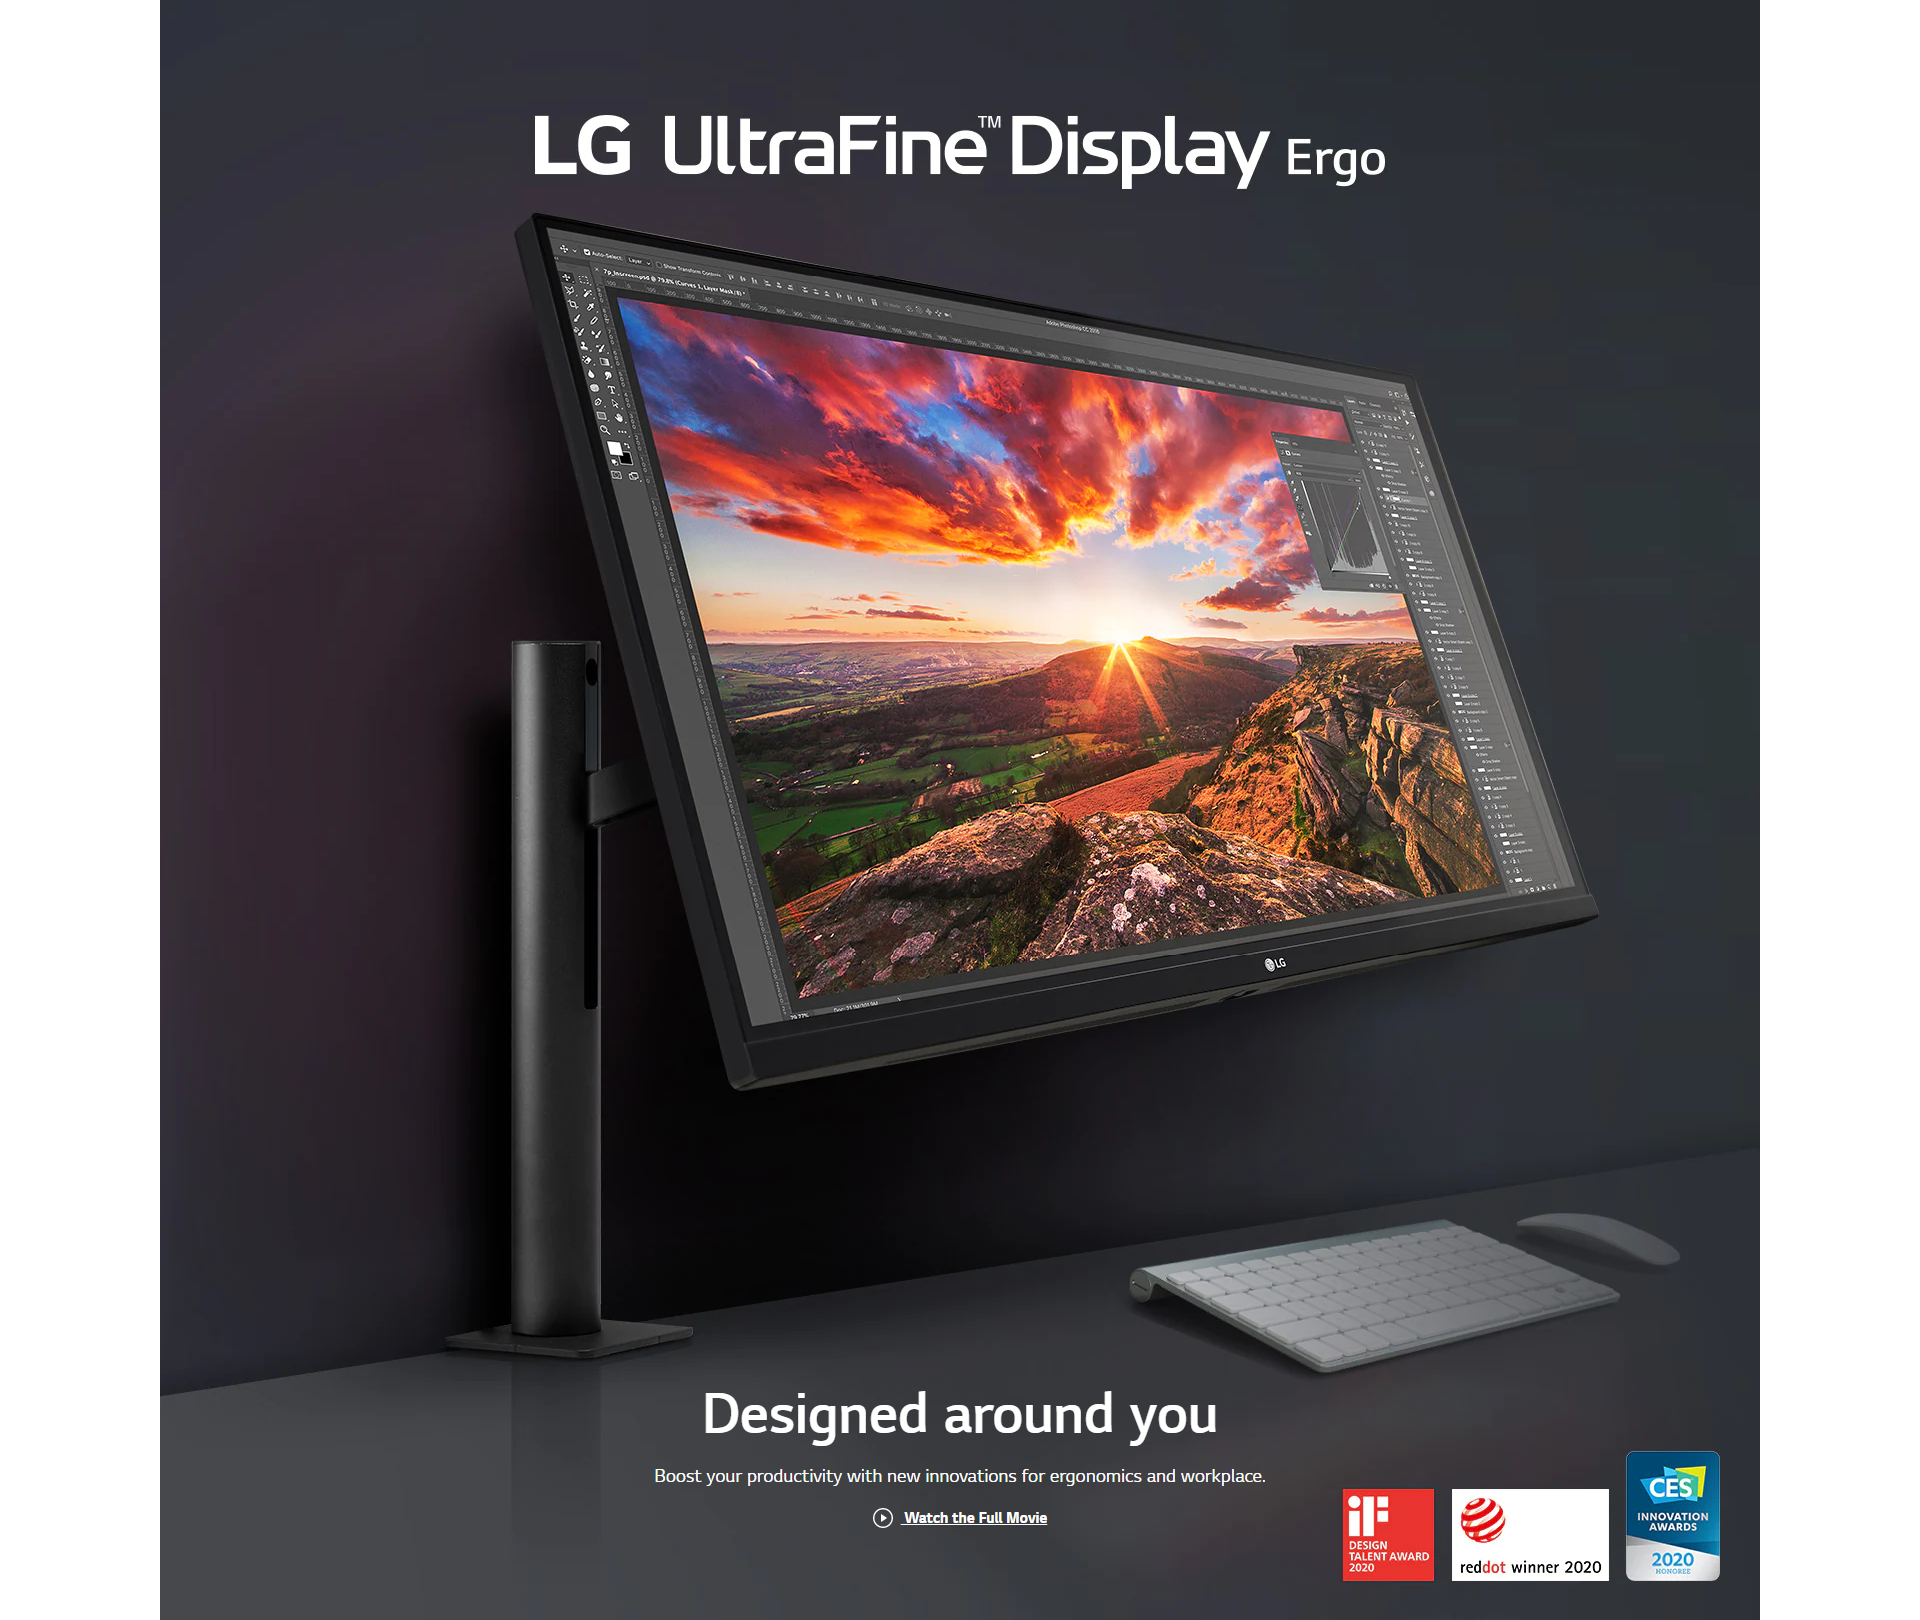 32 4K UHD UltraFine™ Ergo Monitor With HDR10